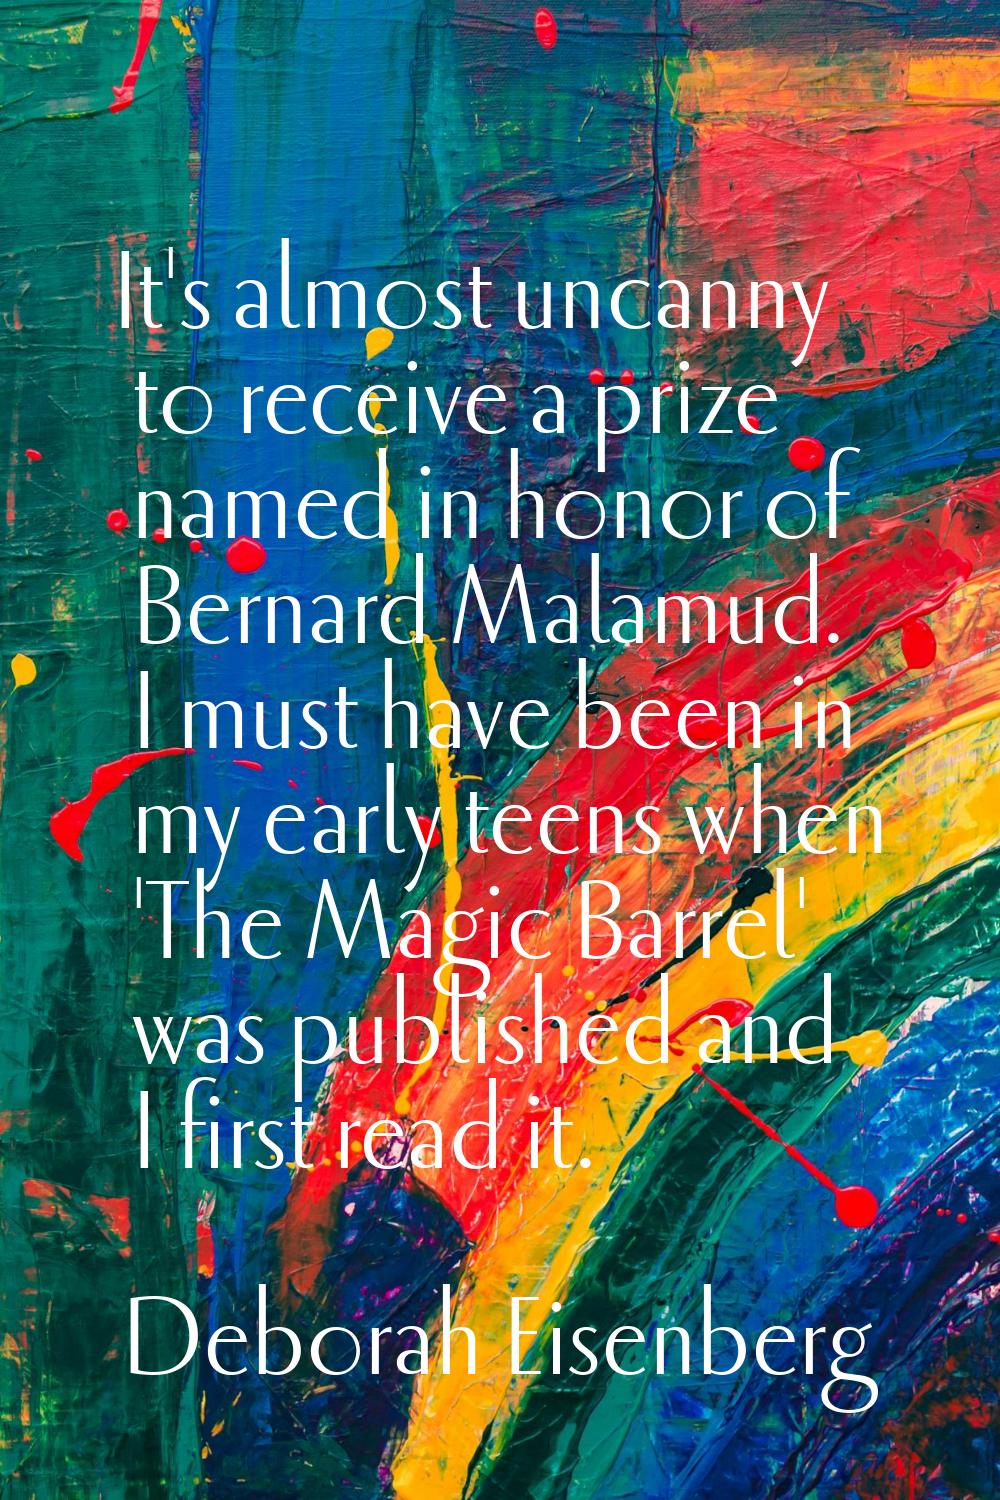 It's almost uncanny to receive a prize named in honor of Bernard Malamud. I must have been in my ea